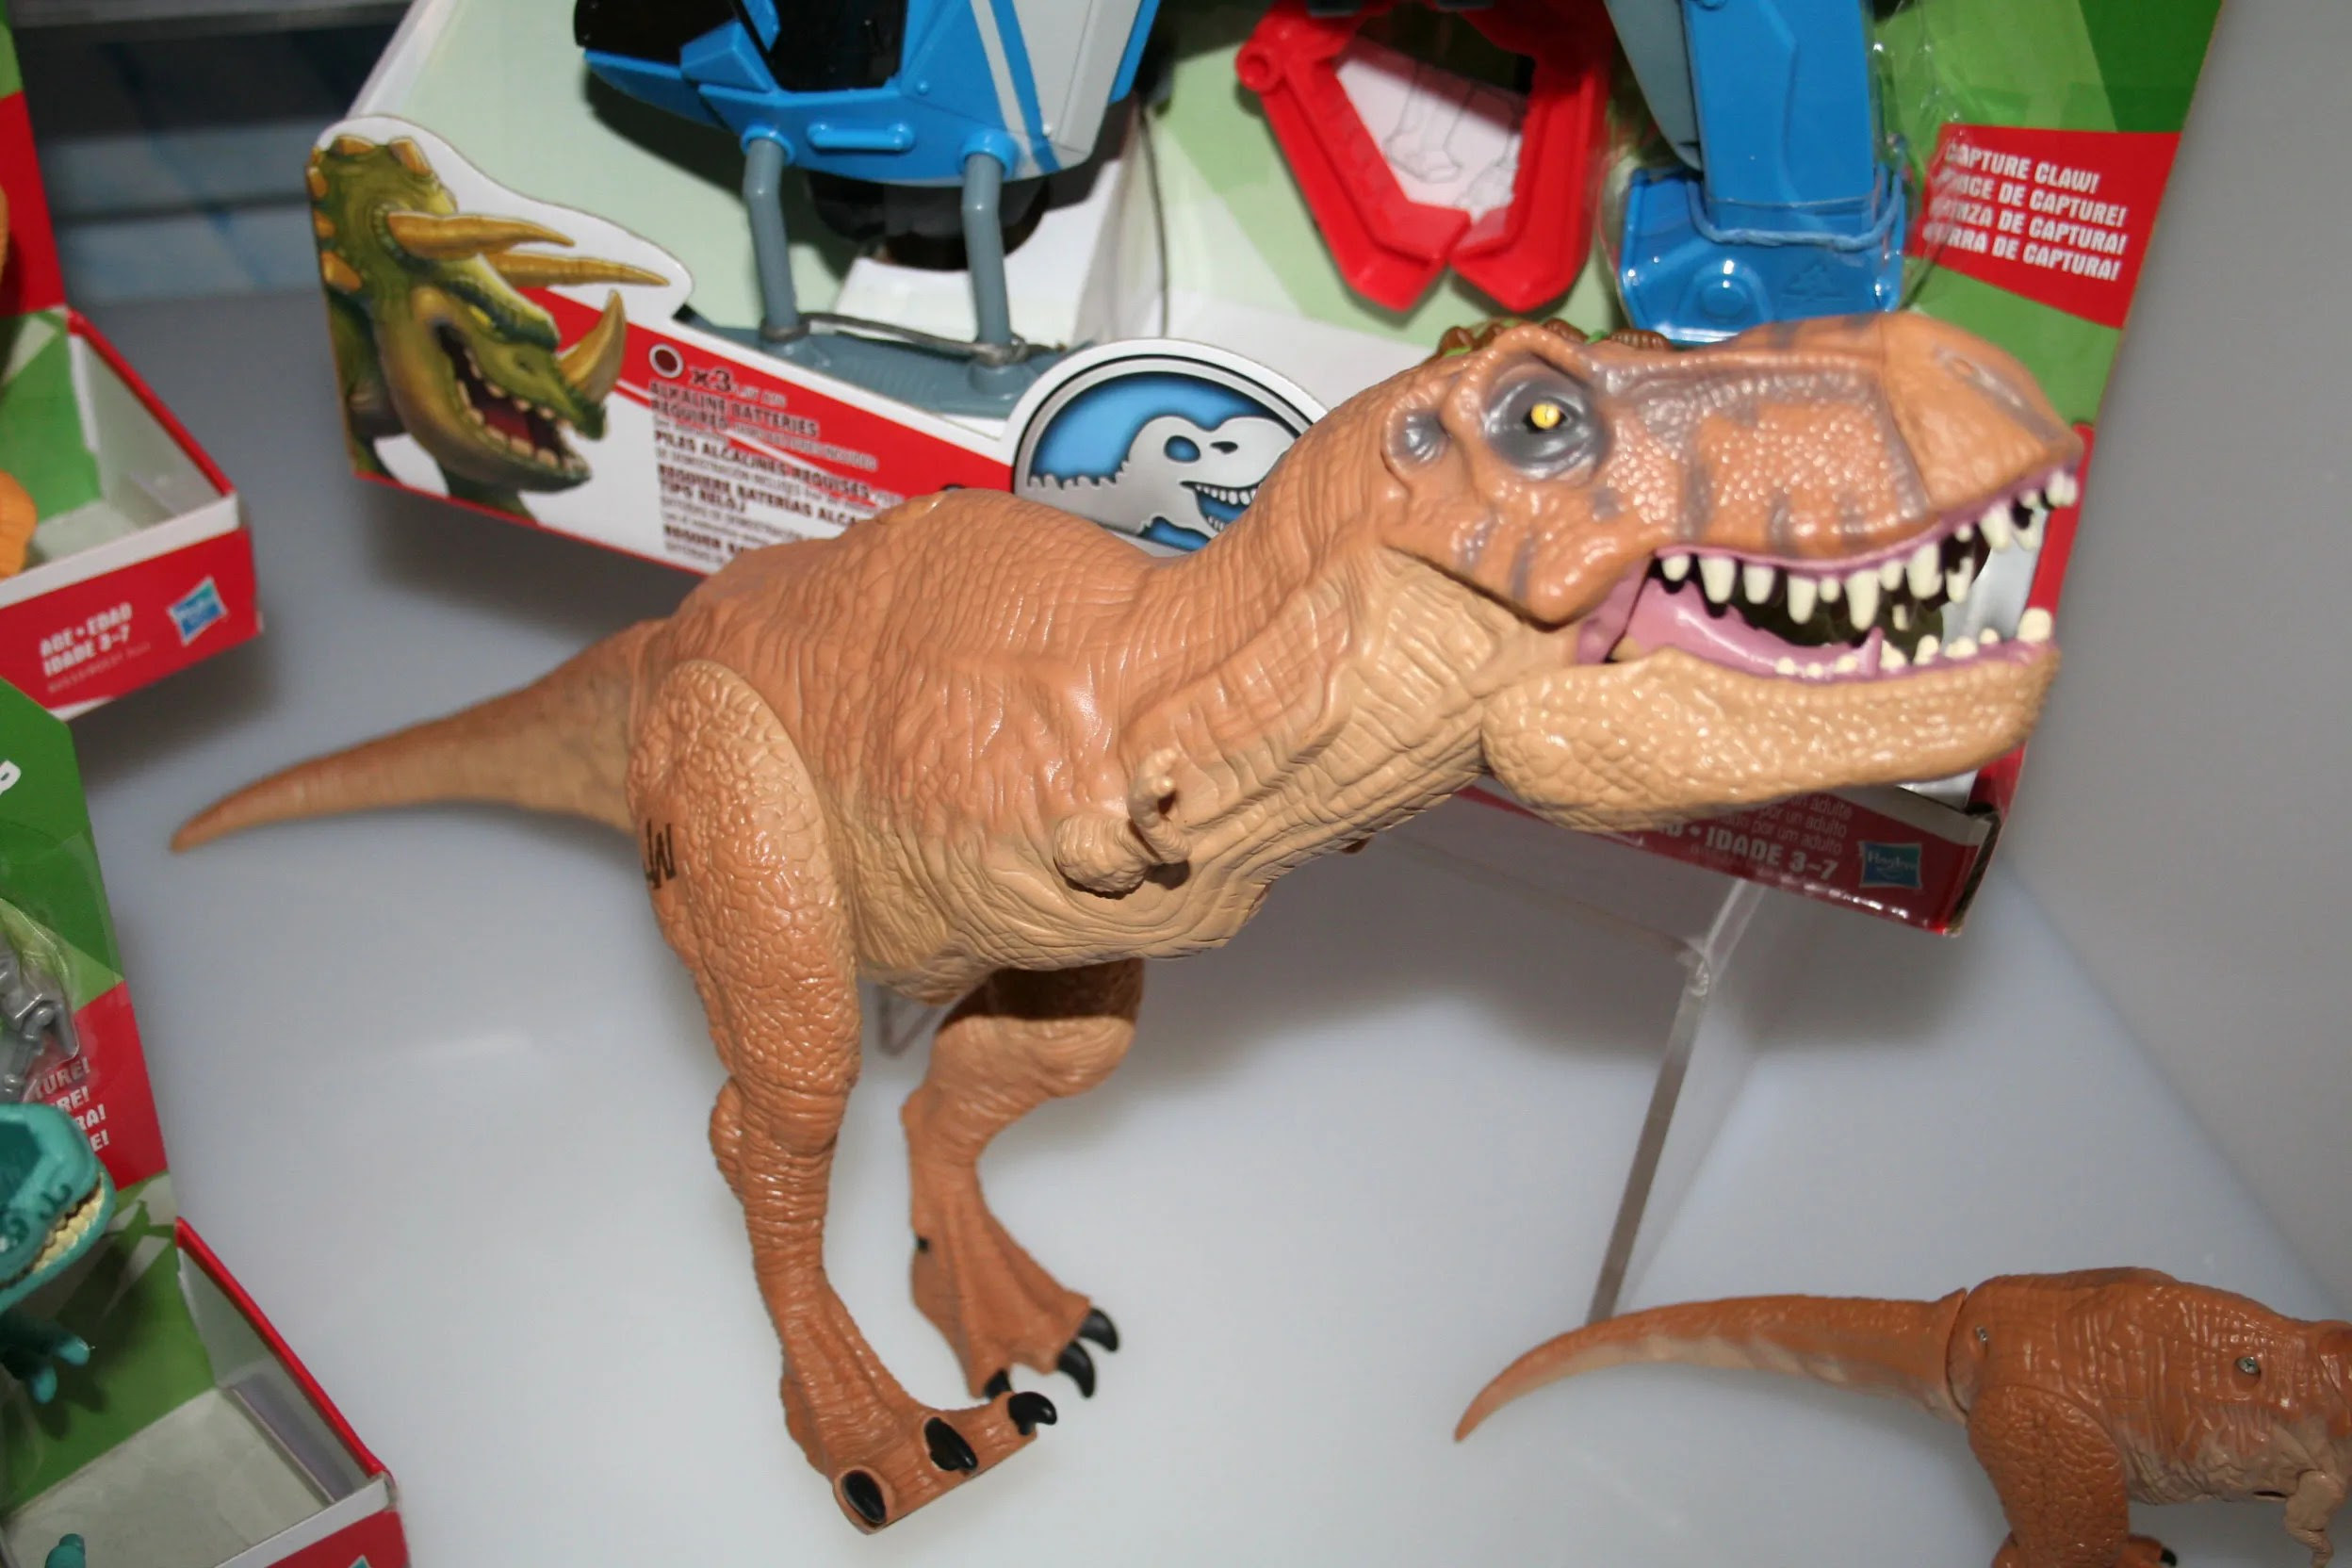 The figures are consisting of bashers &. Jurassic World Merchandise Images from Universal at Toy Fair 2015